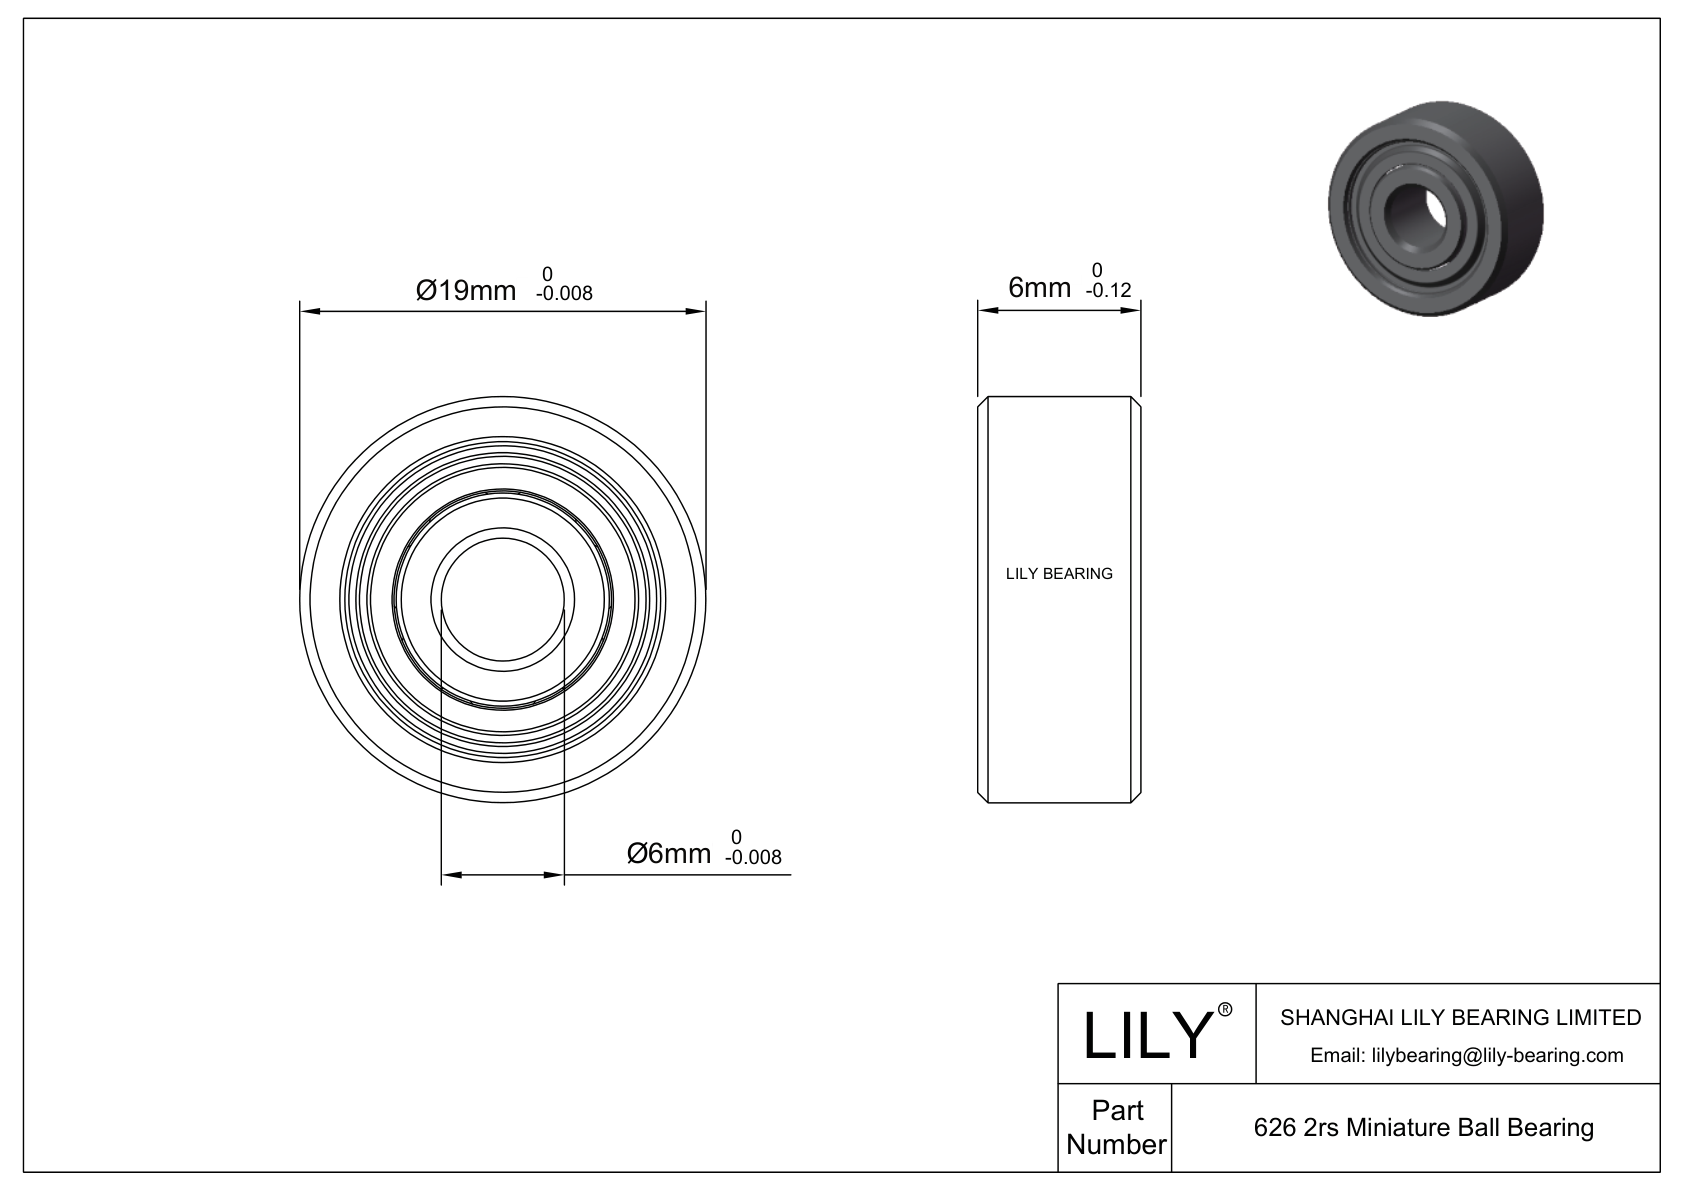 LILY-BST62630-20 Outsourcing POM bearings cad drawing